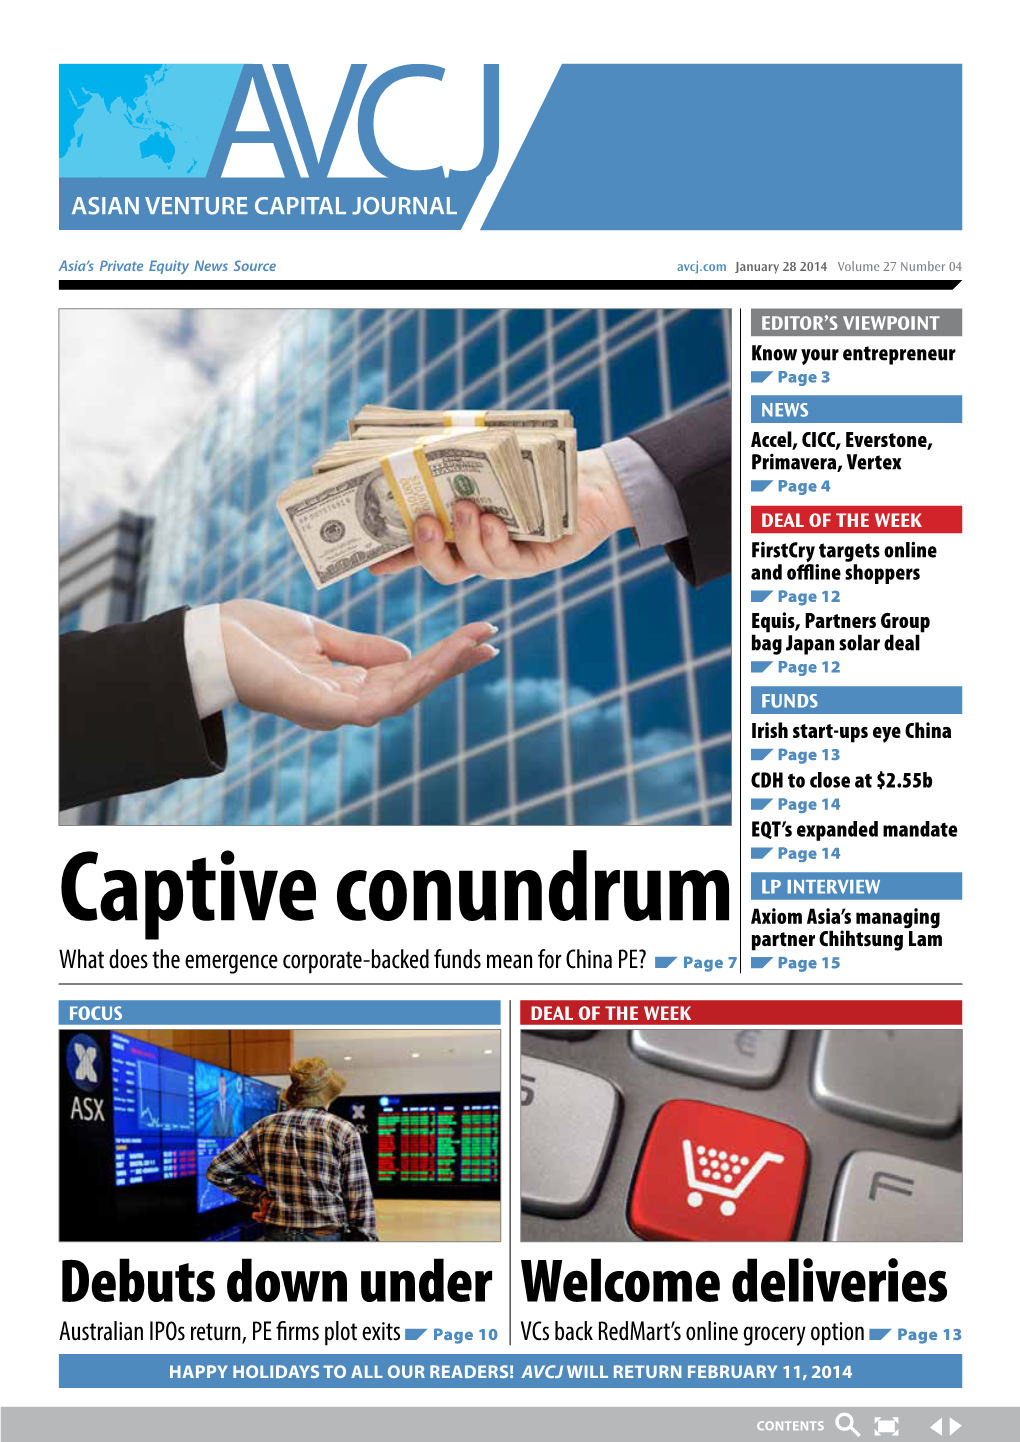 Captive Conundrum Axiom Asia’S Managing Partner Chihtsung Lam What Does the Emergence Corporate-Backed Funds Mean for China PE? Page 7 Page 15